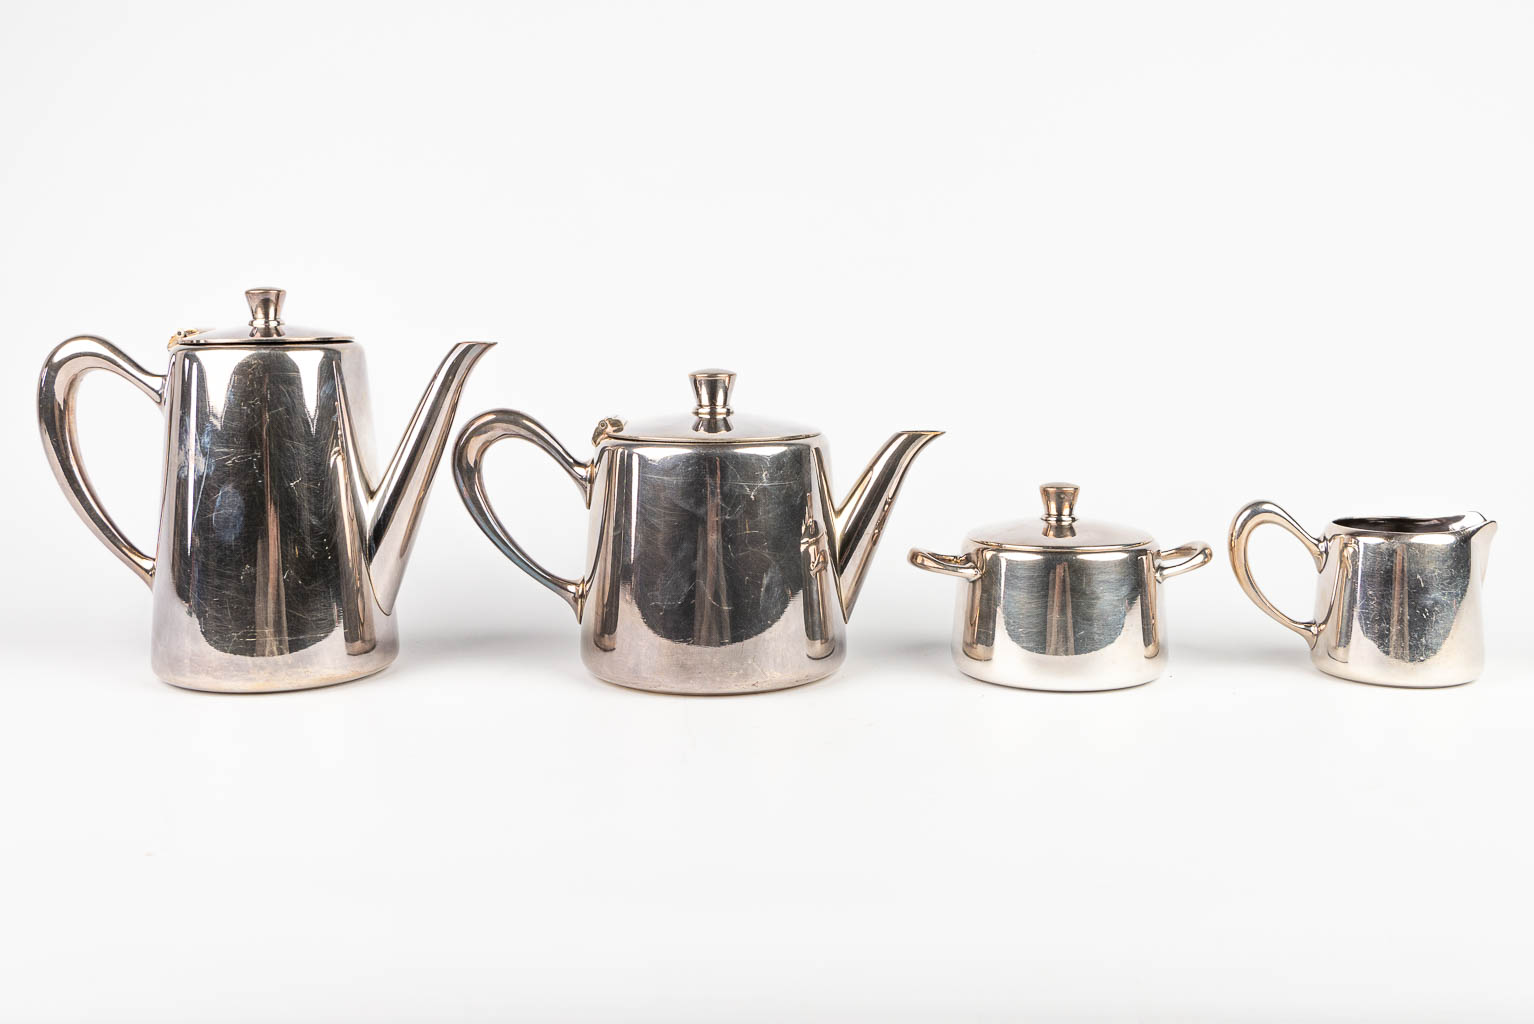 A coffee and tea service made of silver-plated metal and marked Christofle. (H:18cm)